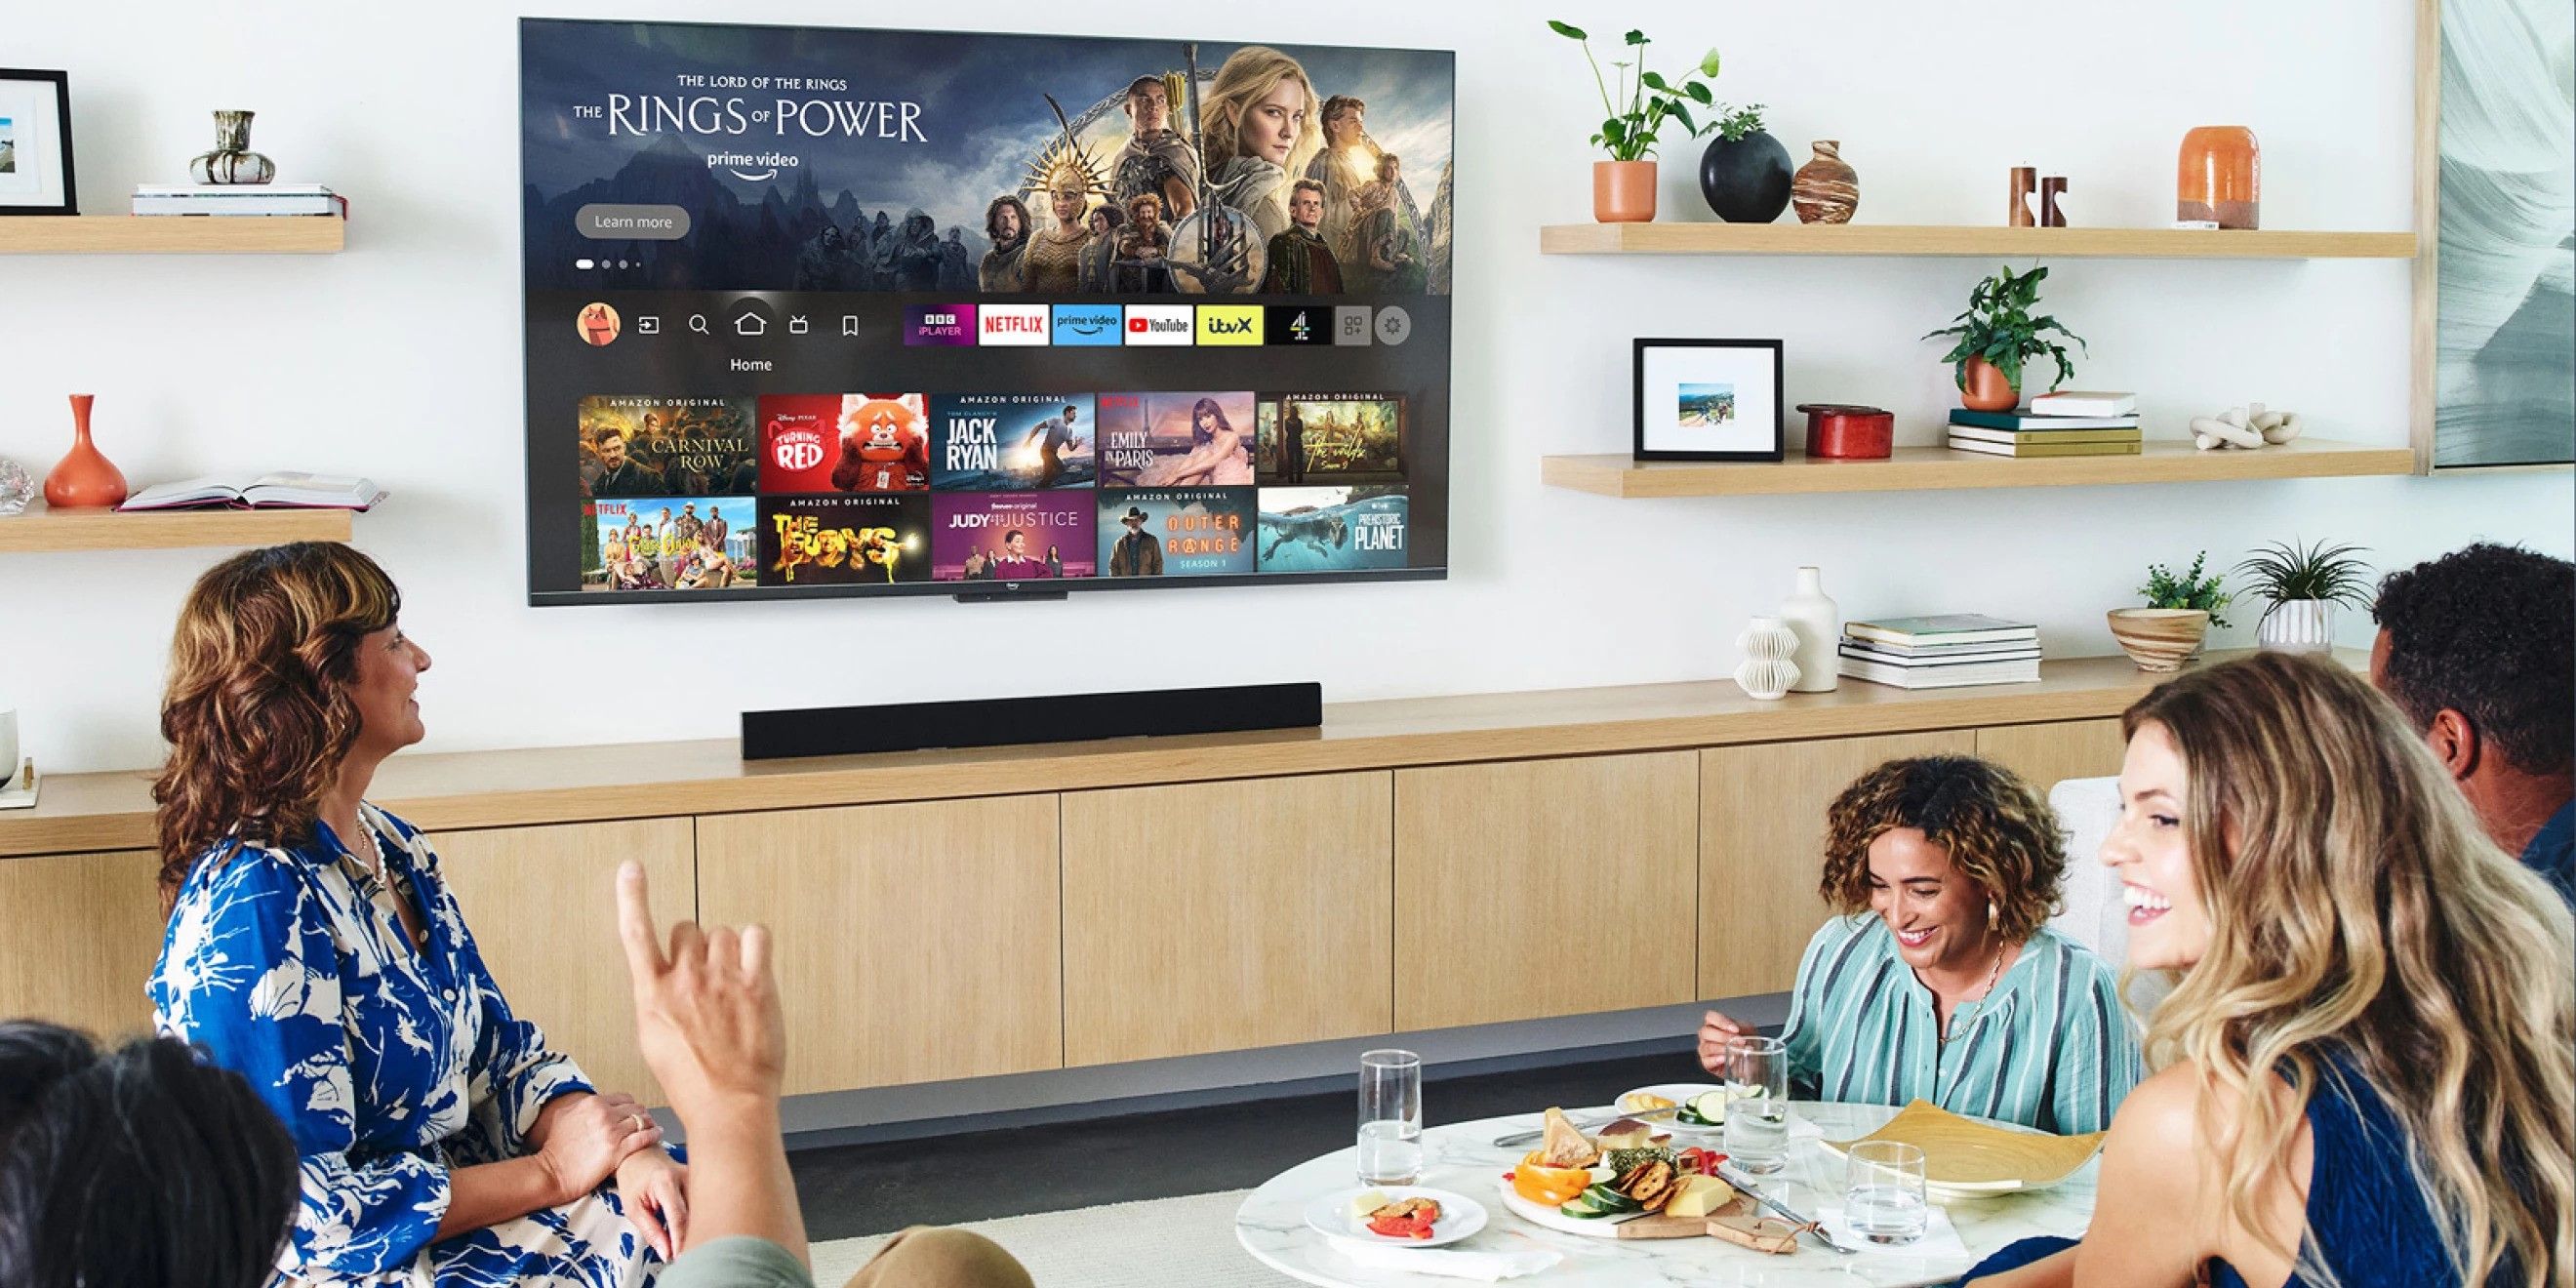 Image showing a family sitting around an Amazon Fire TV 4K smart TV